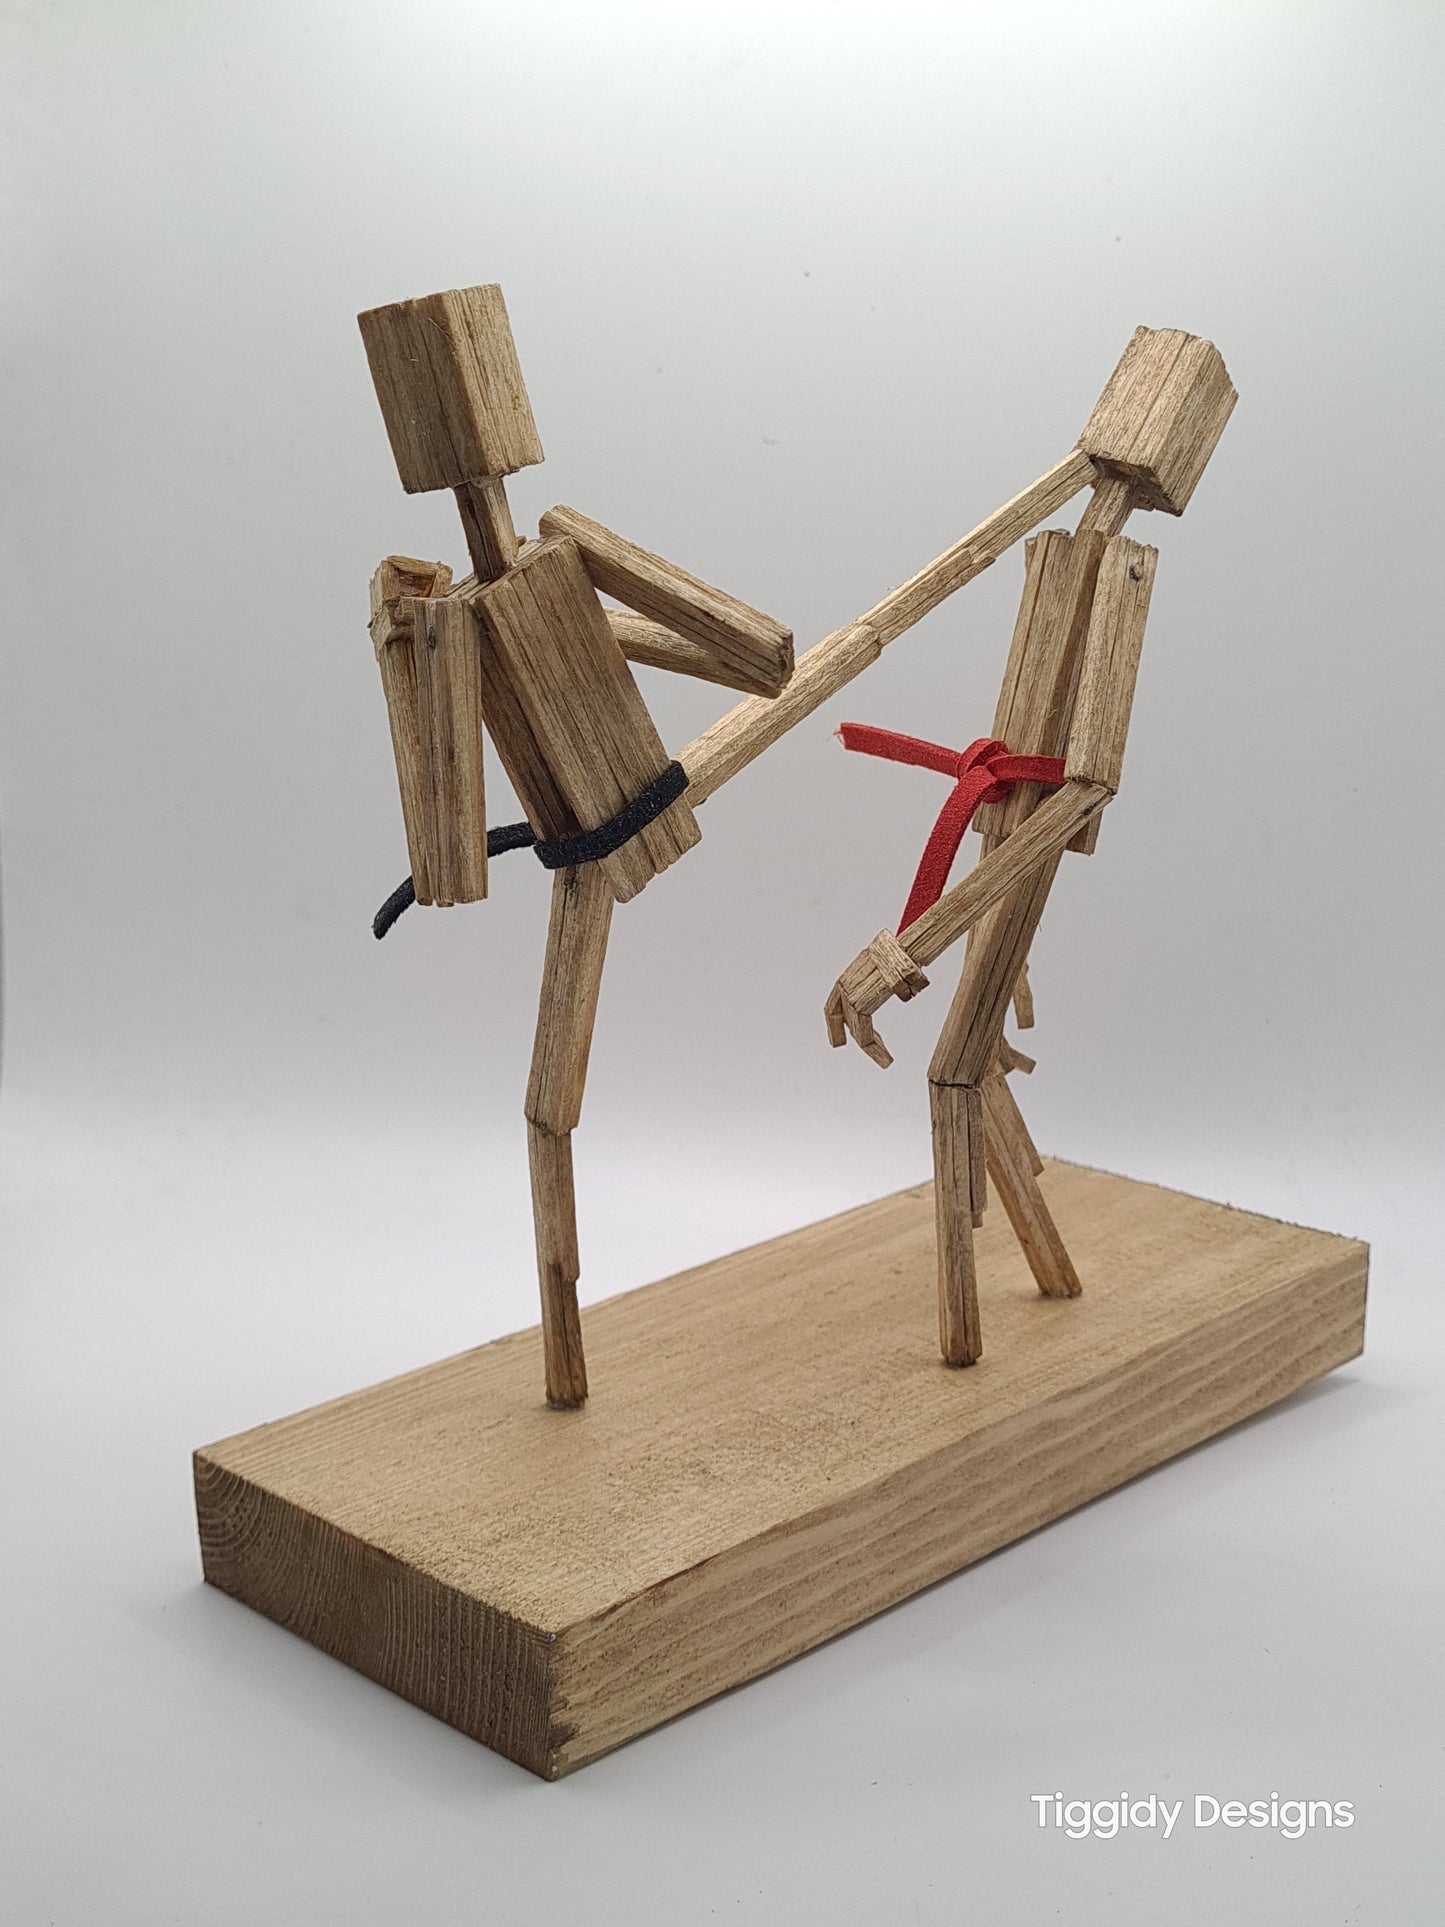 Kick To The Head - Handcrafted Wooden Matchstick Figures - Gifts, Ornaments and Decor By Tiggidy Designs